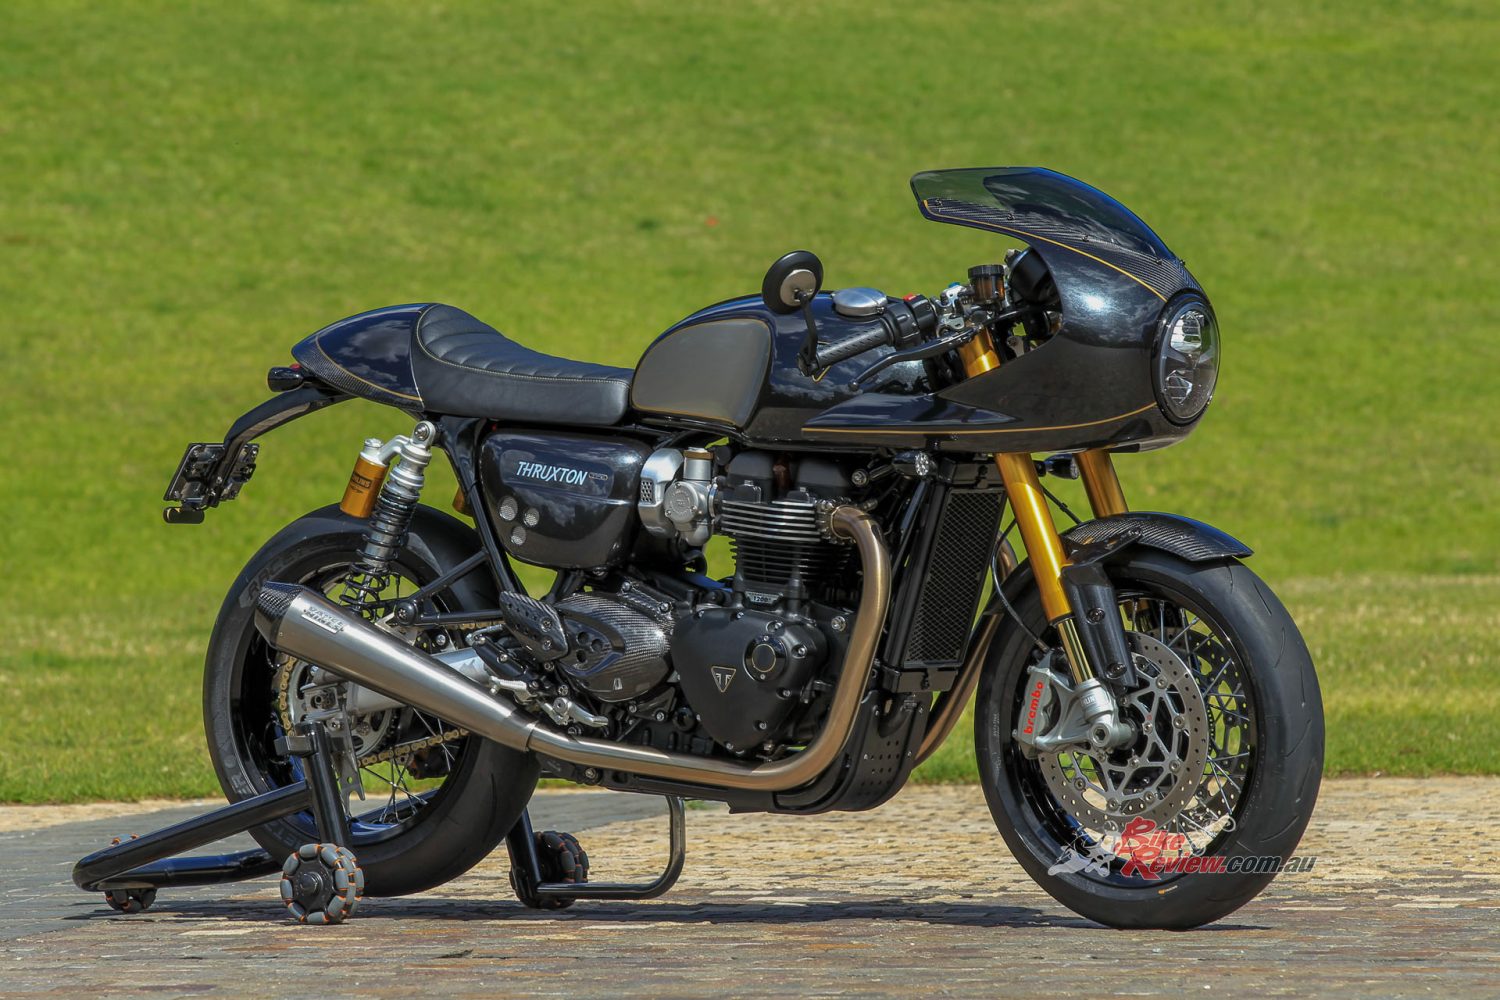 The Triumph Thruxton TFC isn't just a stock Thruxton 1200 with a special badge. Triumph gave it a spec'd up engine and some seriously premium equipment.